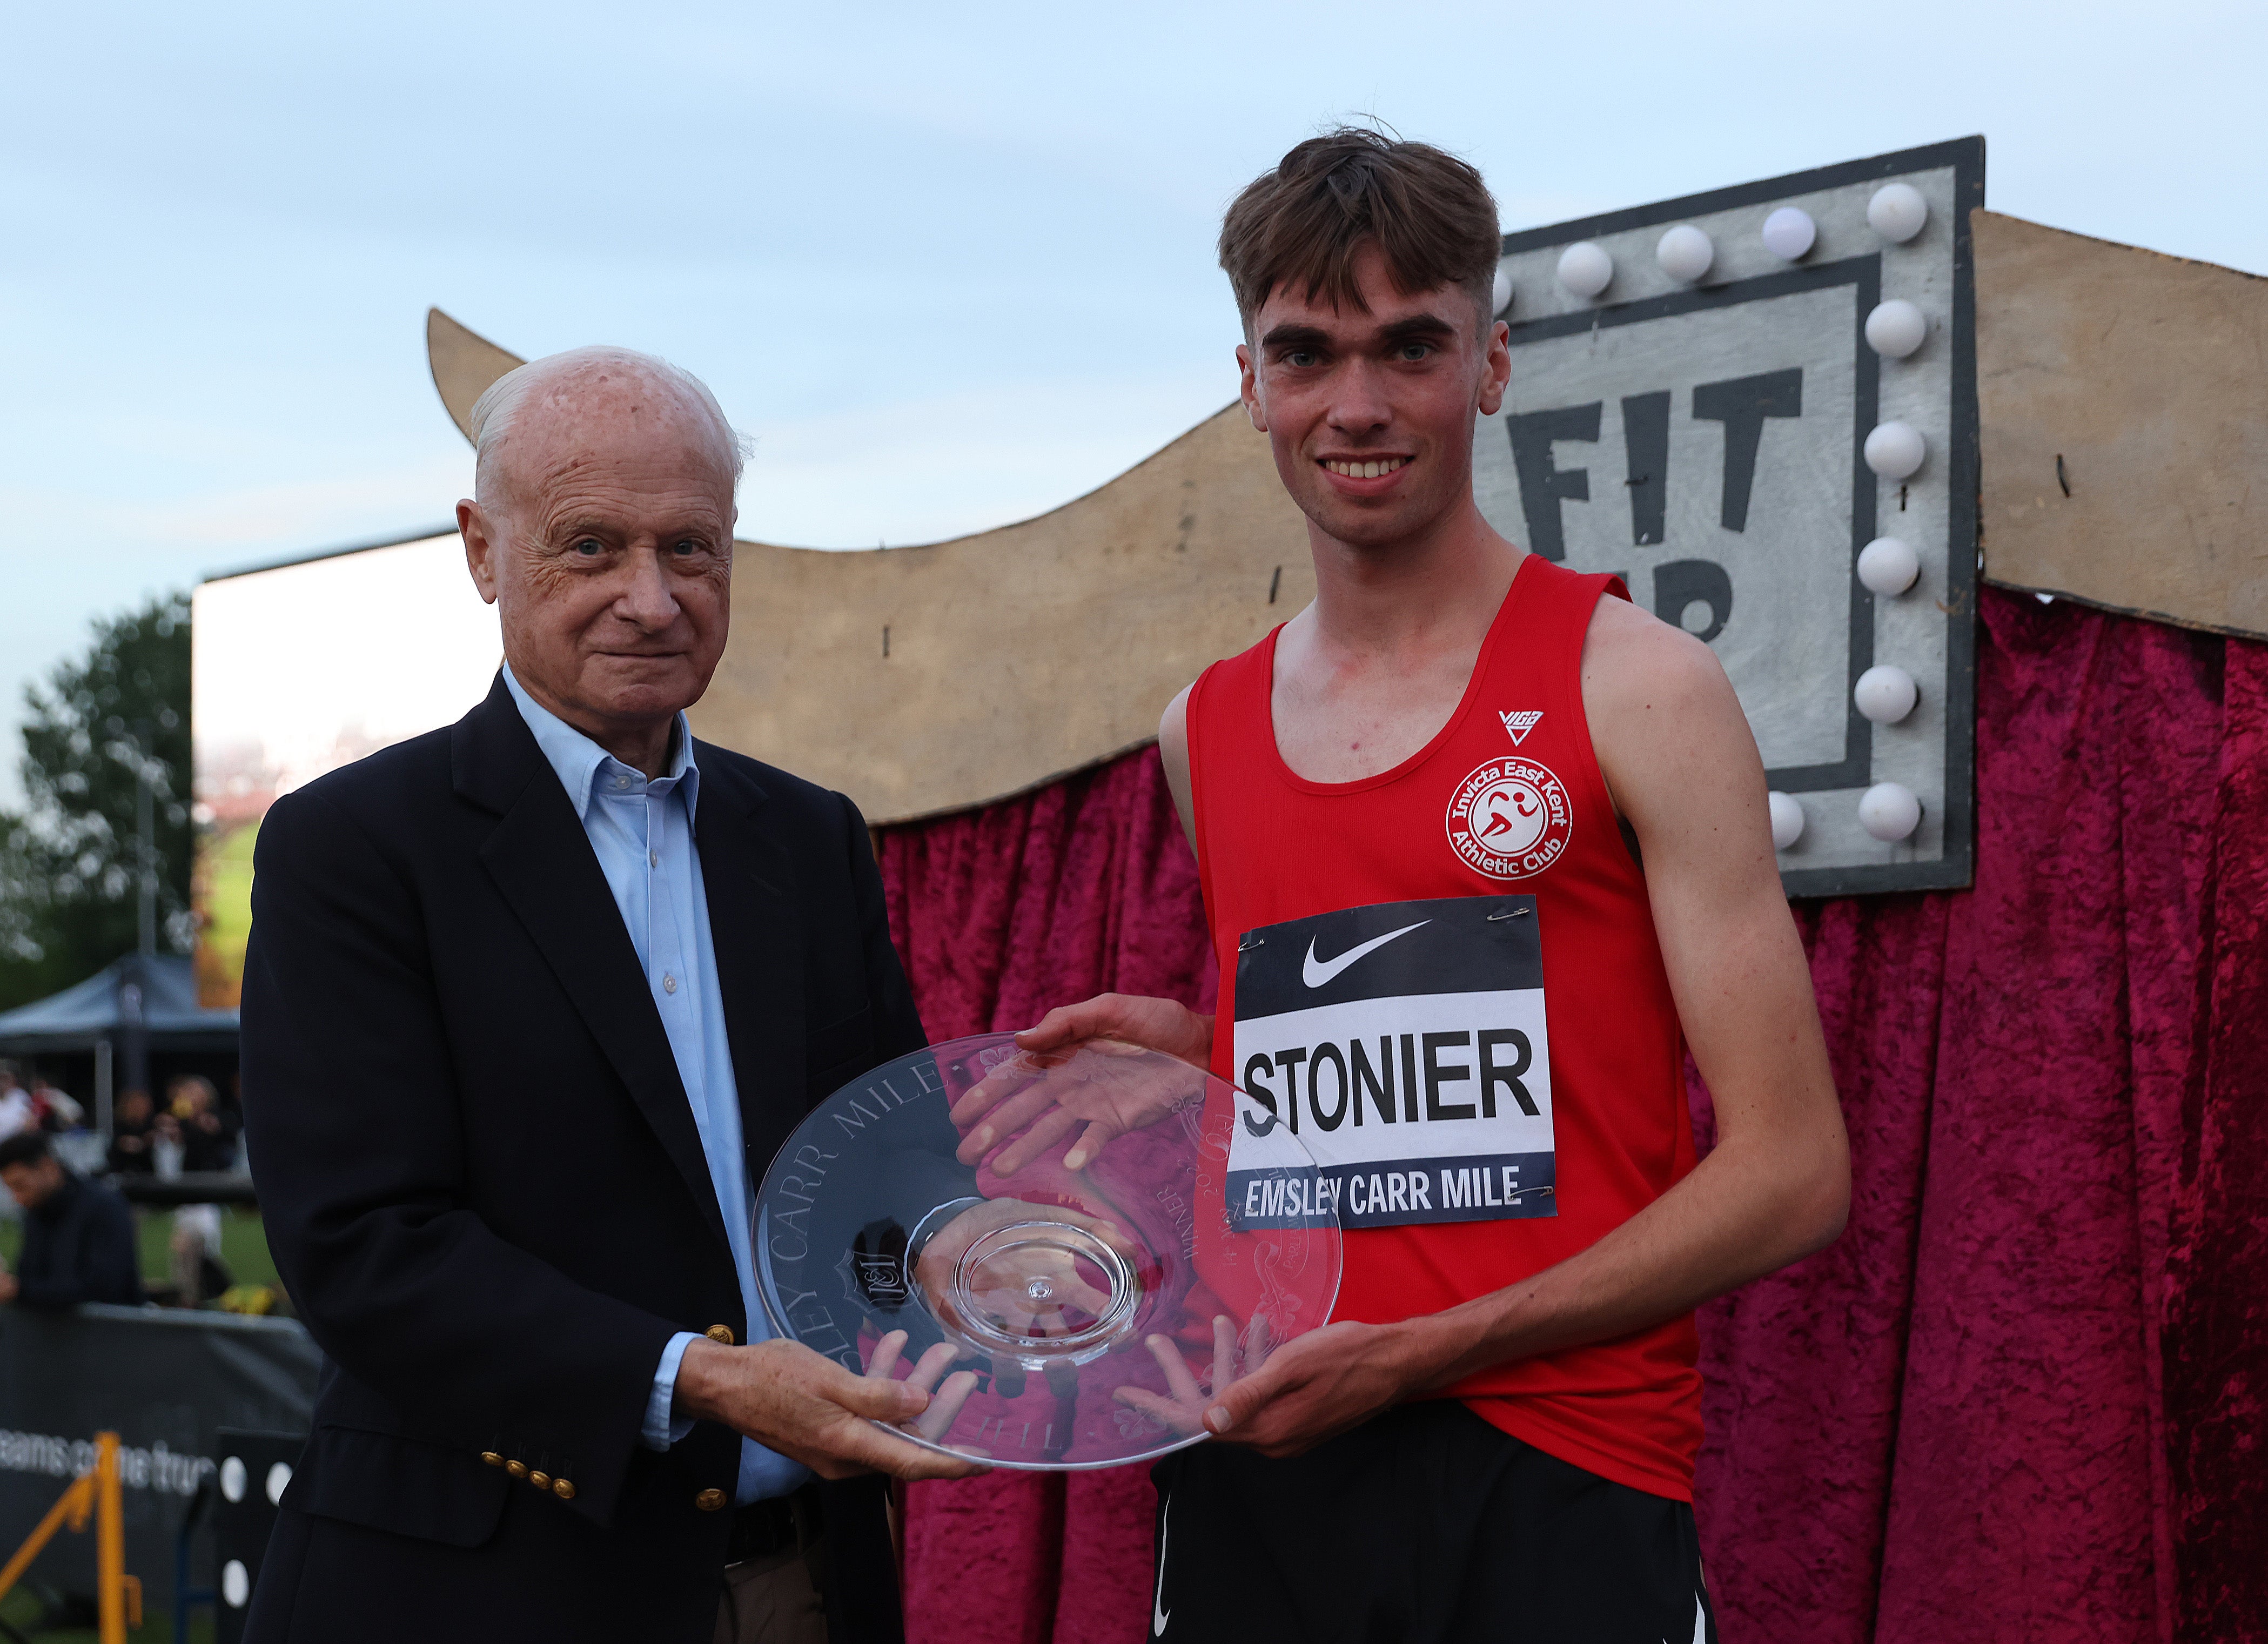 Matthew Stonier after winning the Mens’ Nike Emsley Carr Mile